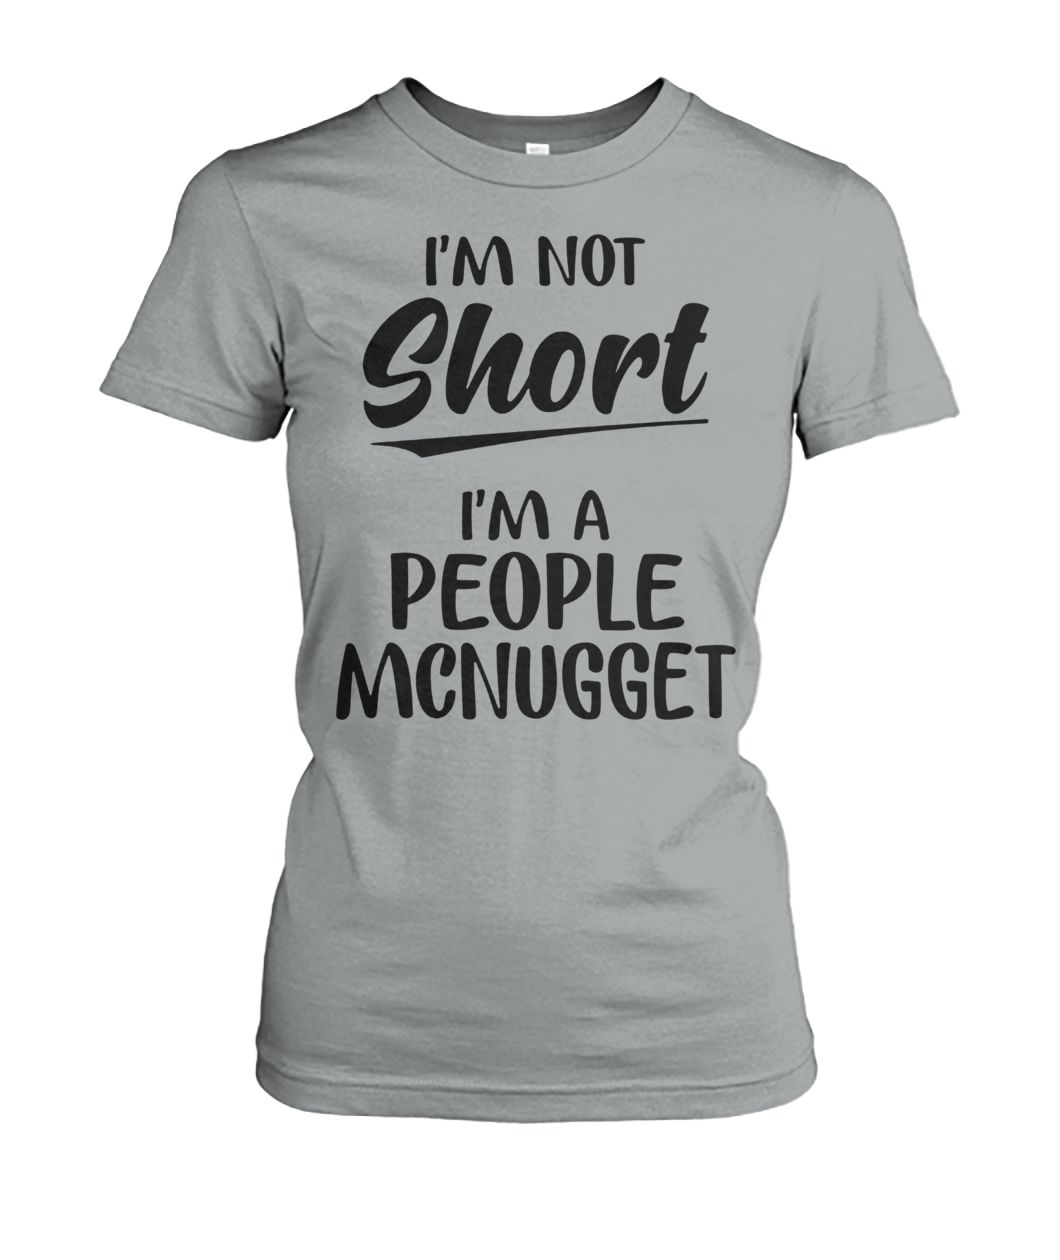 I'm not short I'm a people mcnugget women's crew tee